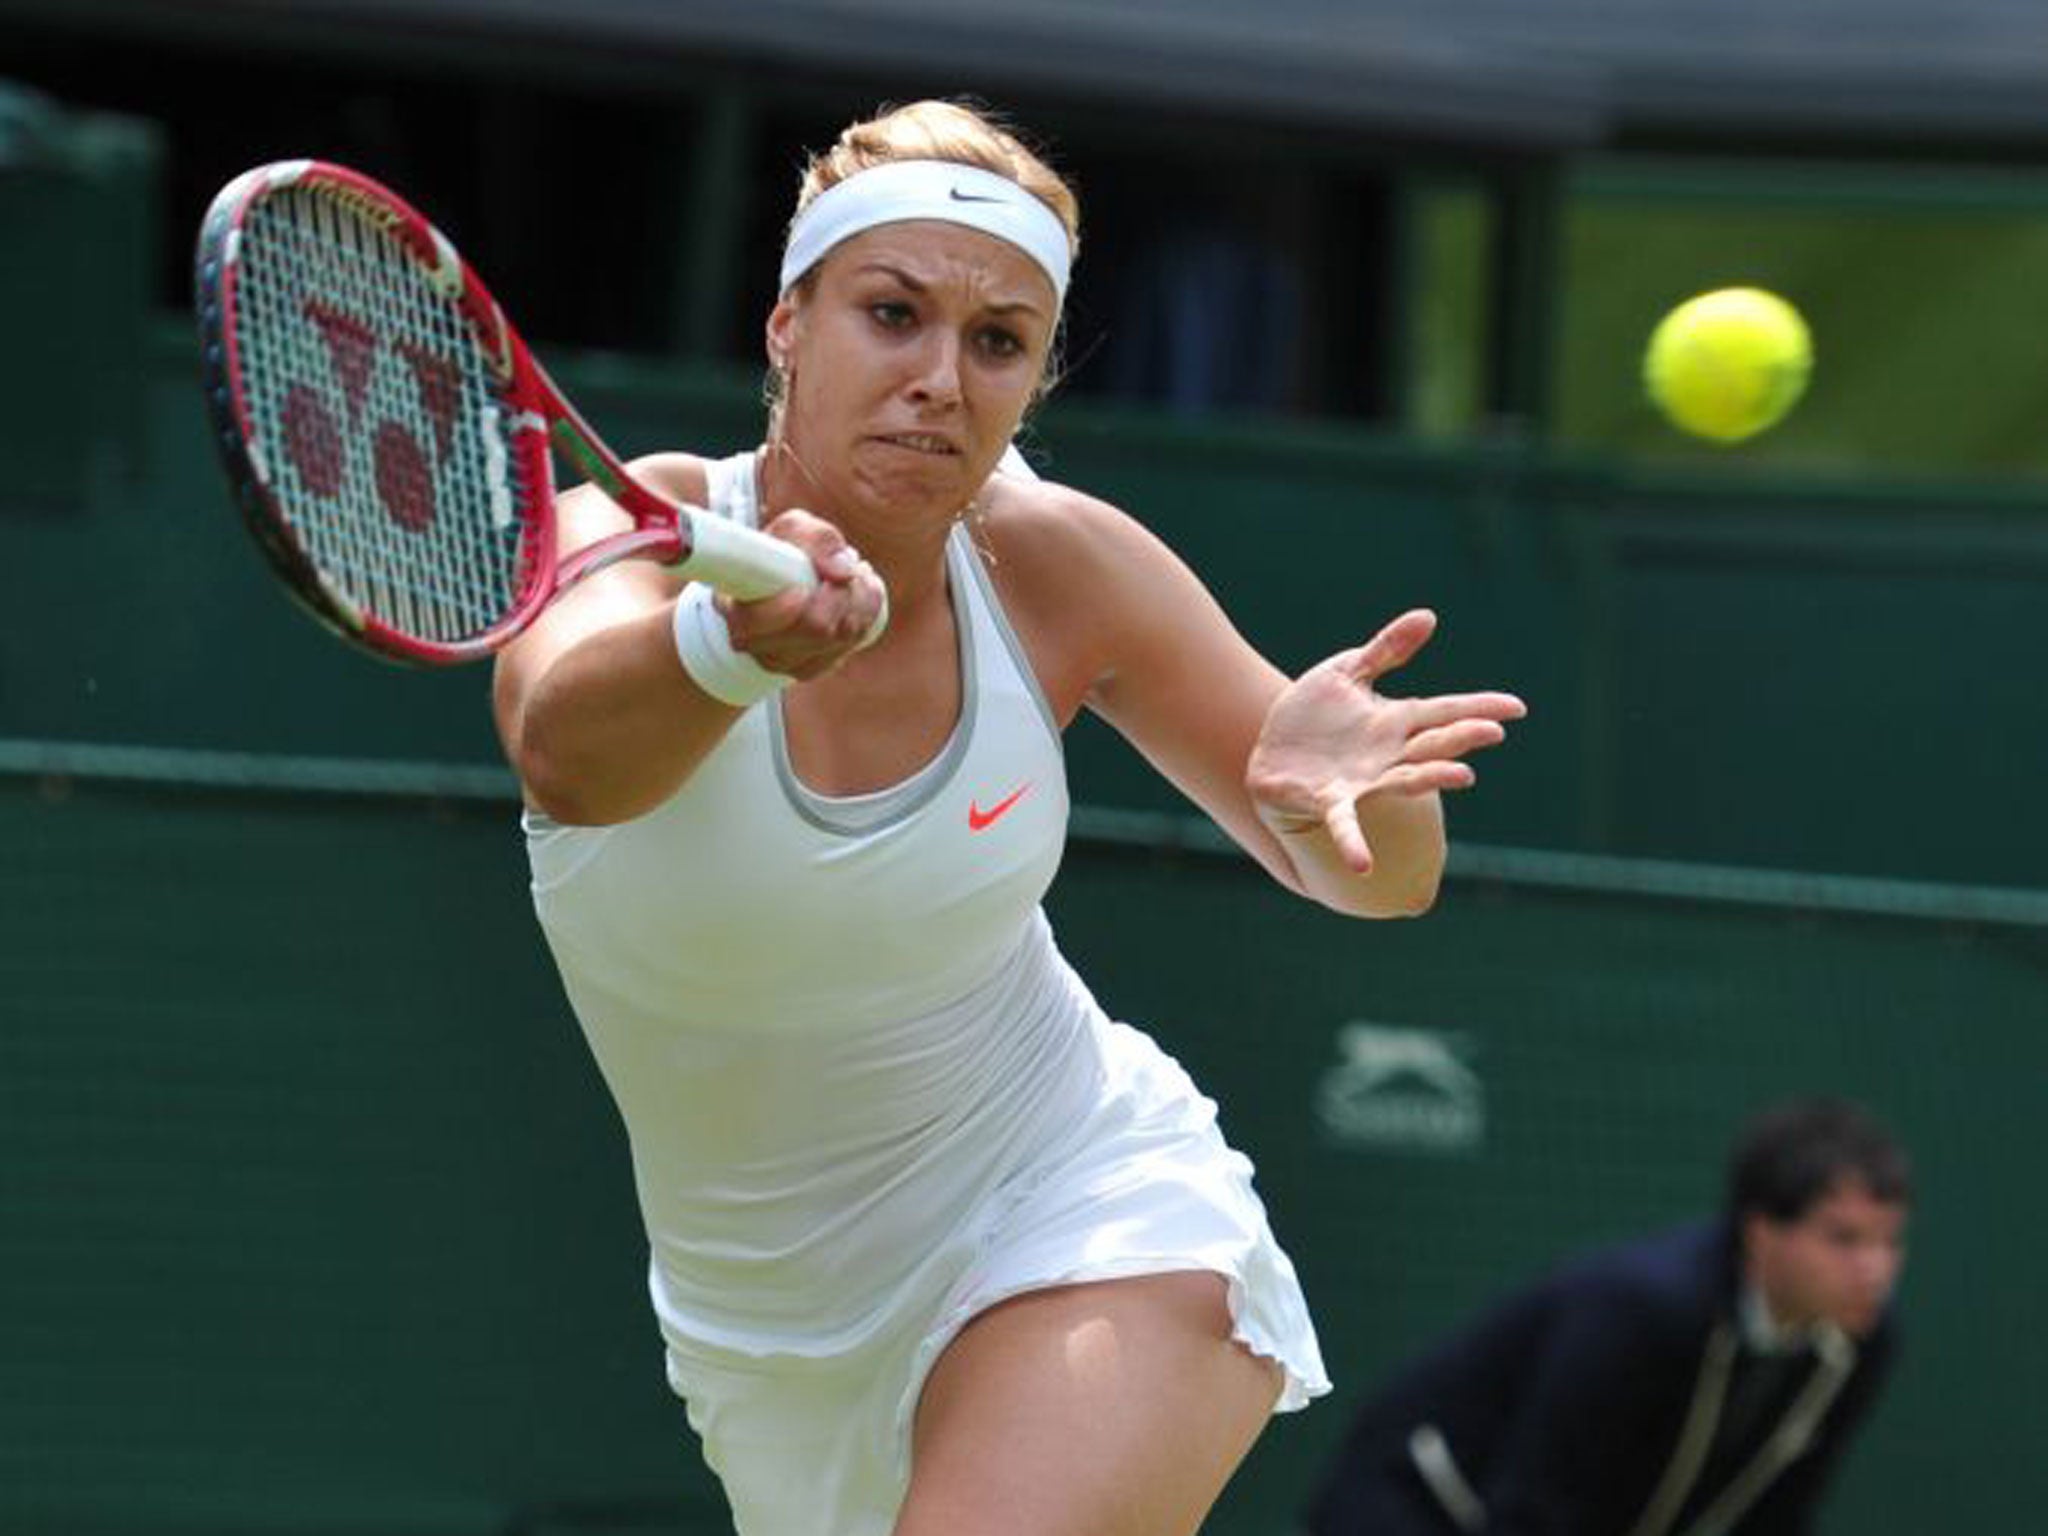 Sabine Lisicki’s aggressive approach got the better of Serena Williams